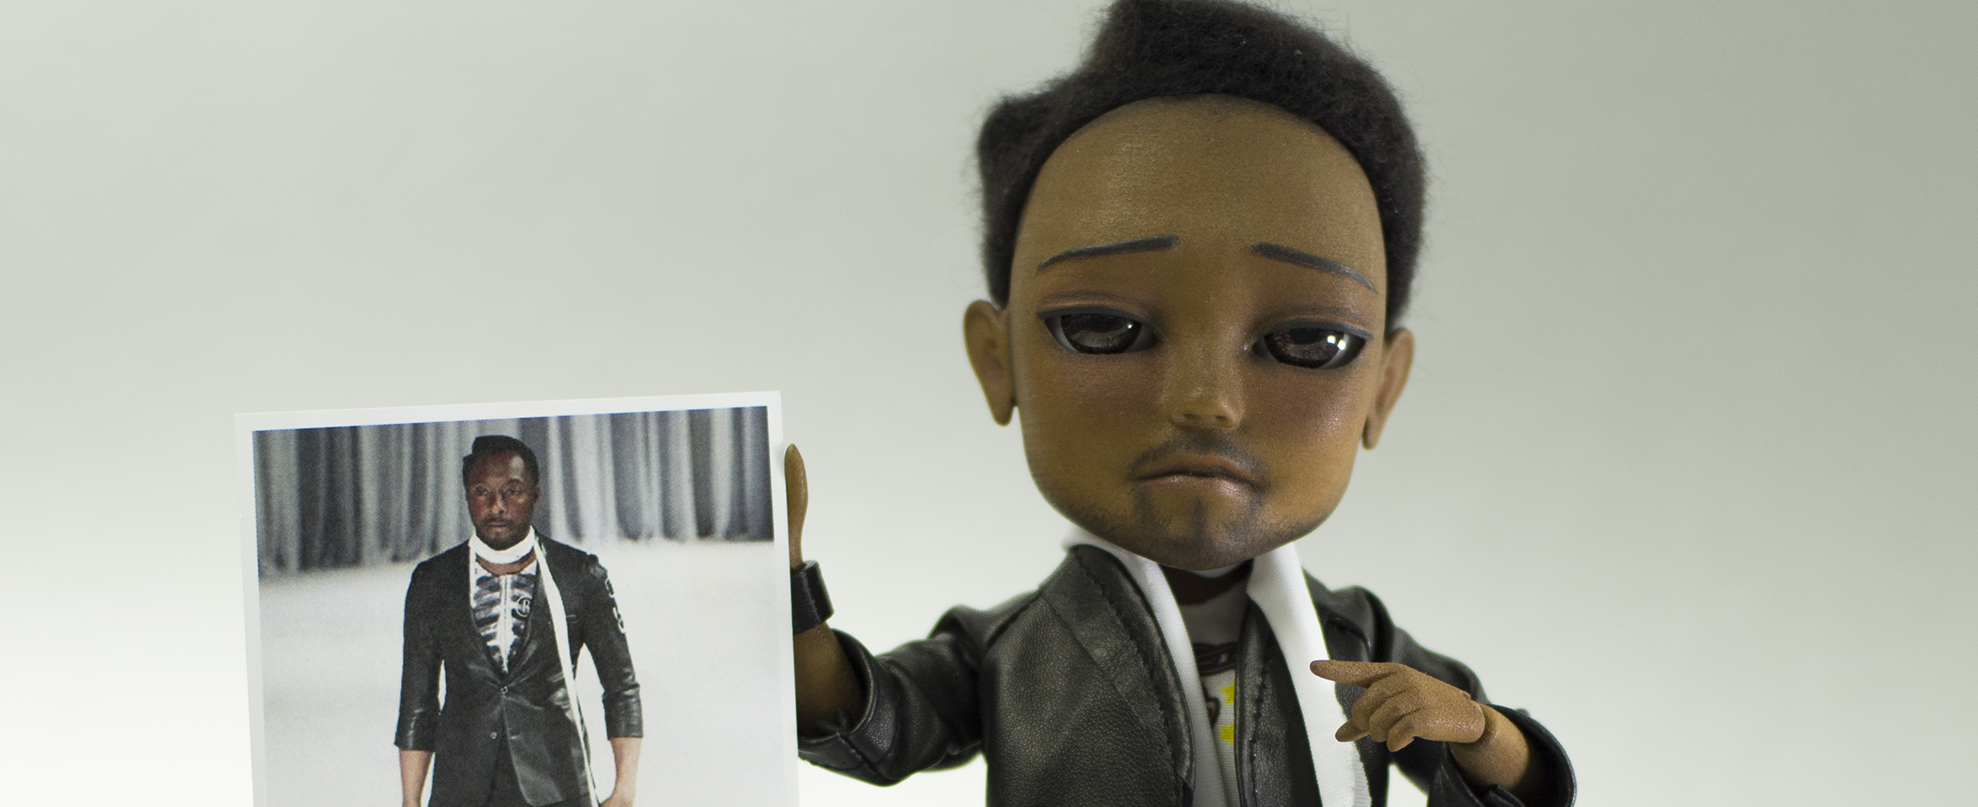 A doll that looks like The Black Eyed Peas Will.i.am holds up a photo of the real Will.i.am